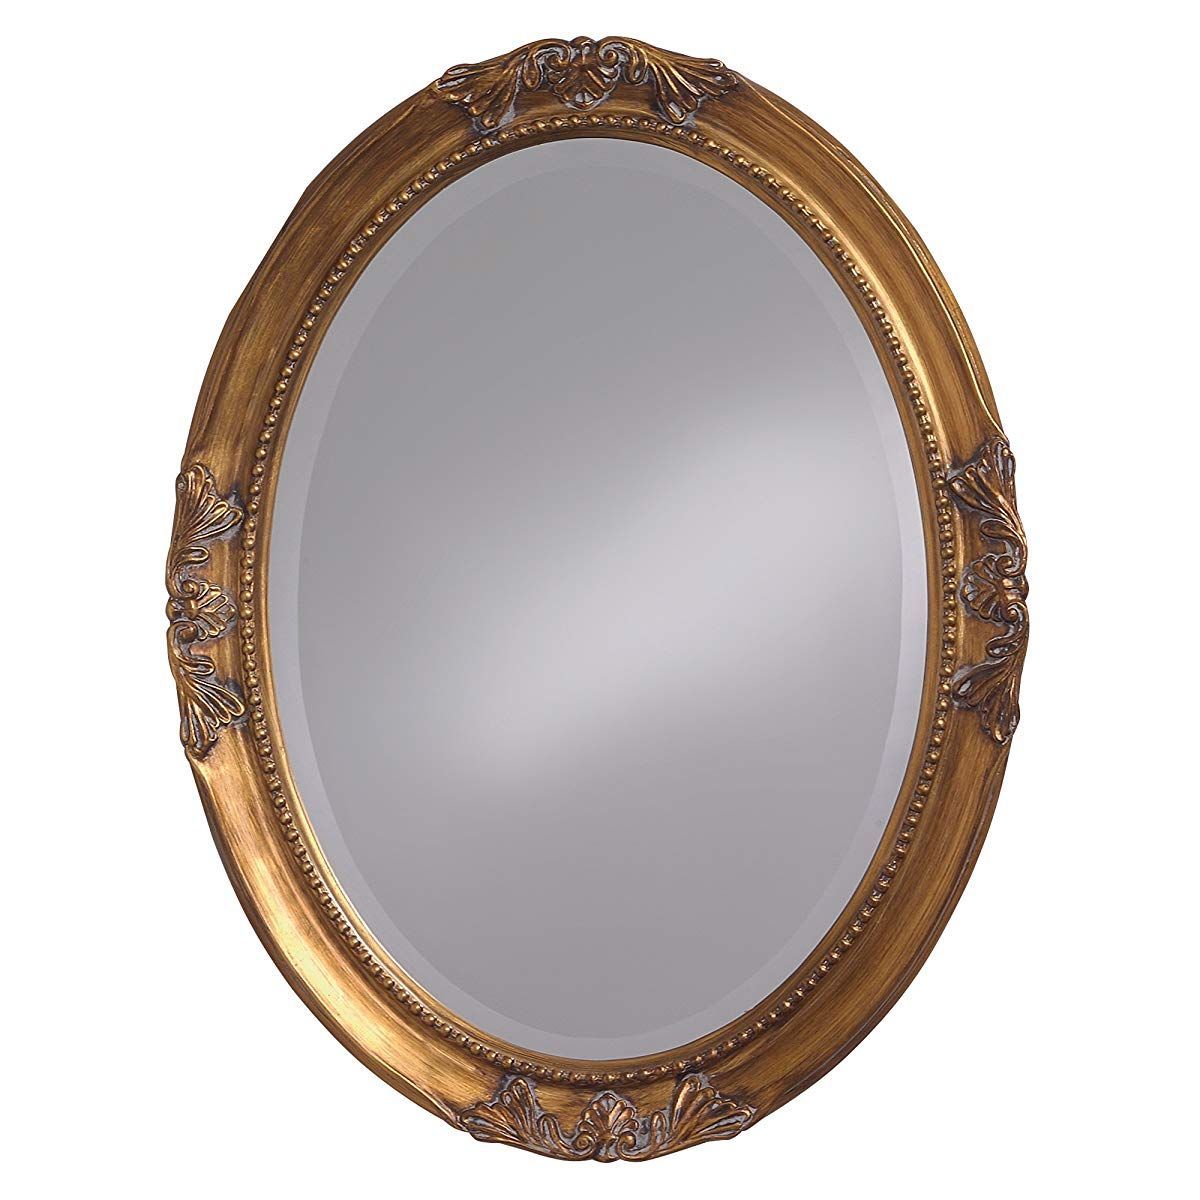 Hanging Beveled Oval Wall Mirror, Antique Gold Leaf | Antique Gold In Antique Gold Leaf Round Oversized Wall Mirrors (View 1 of 15)